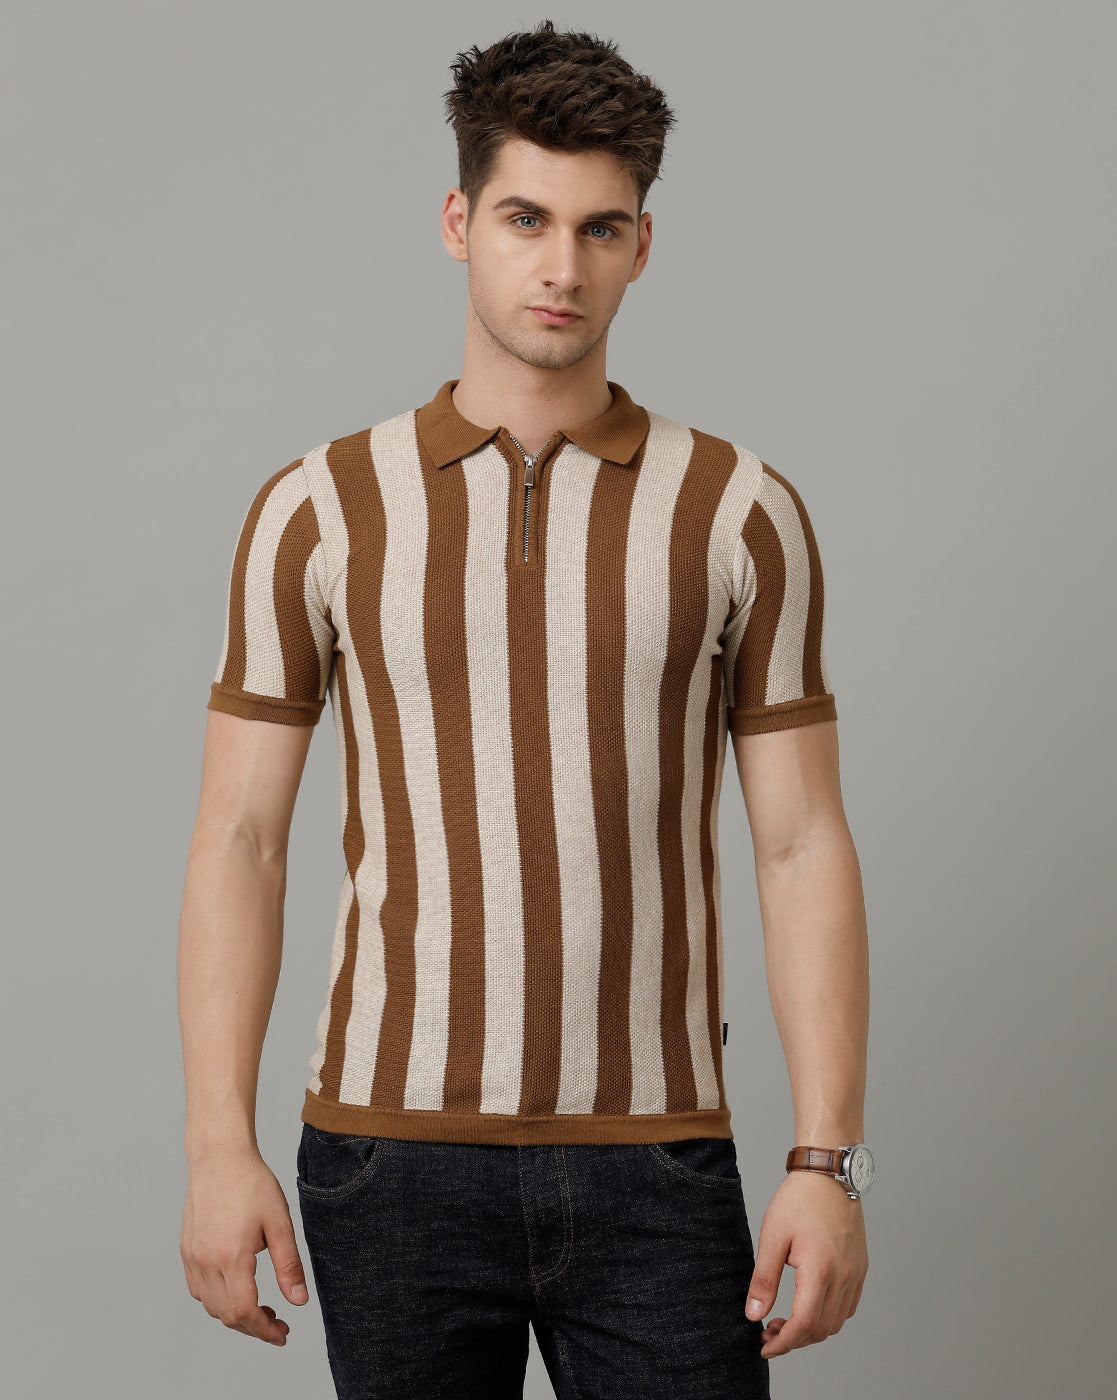 Identiti Brown Half Sleeve Striped Slim Fit Cotton Casual Polo T-Shirt For Men.